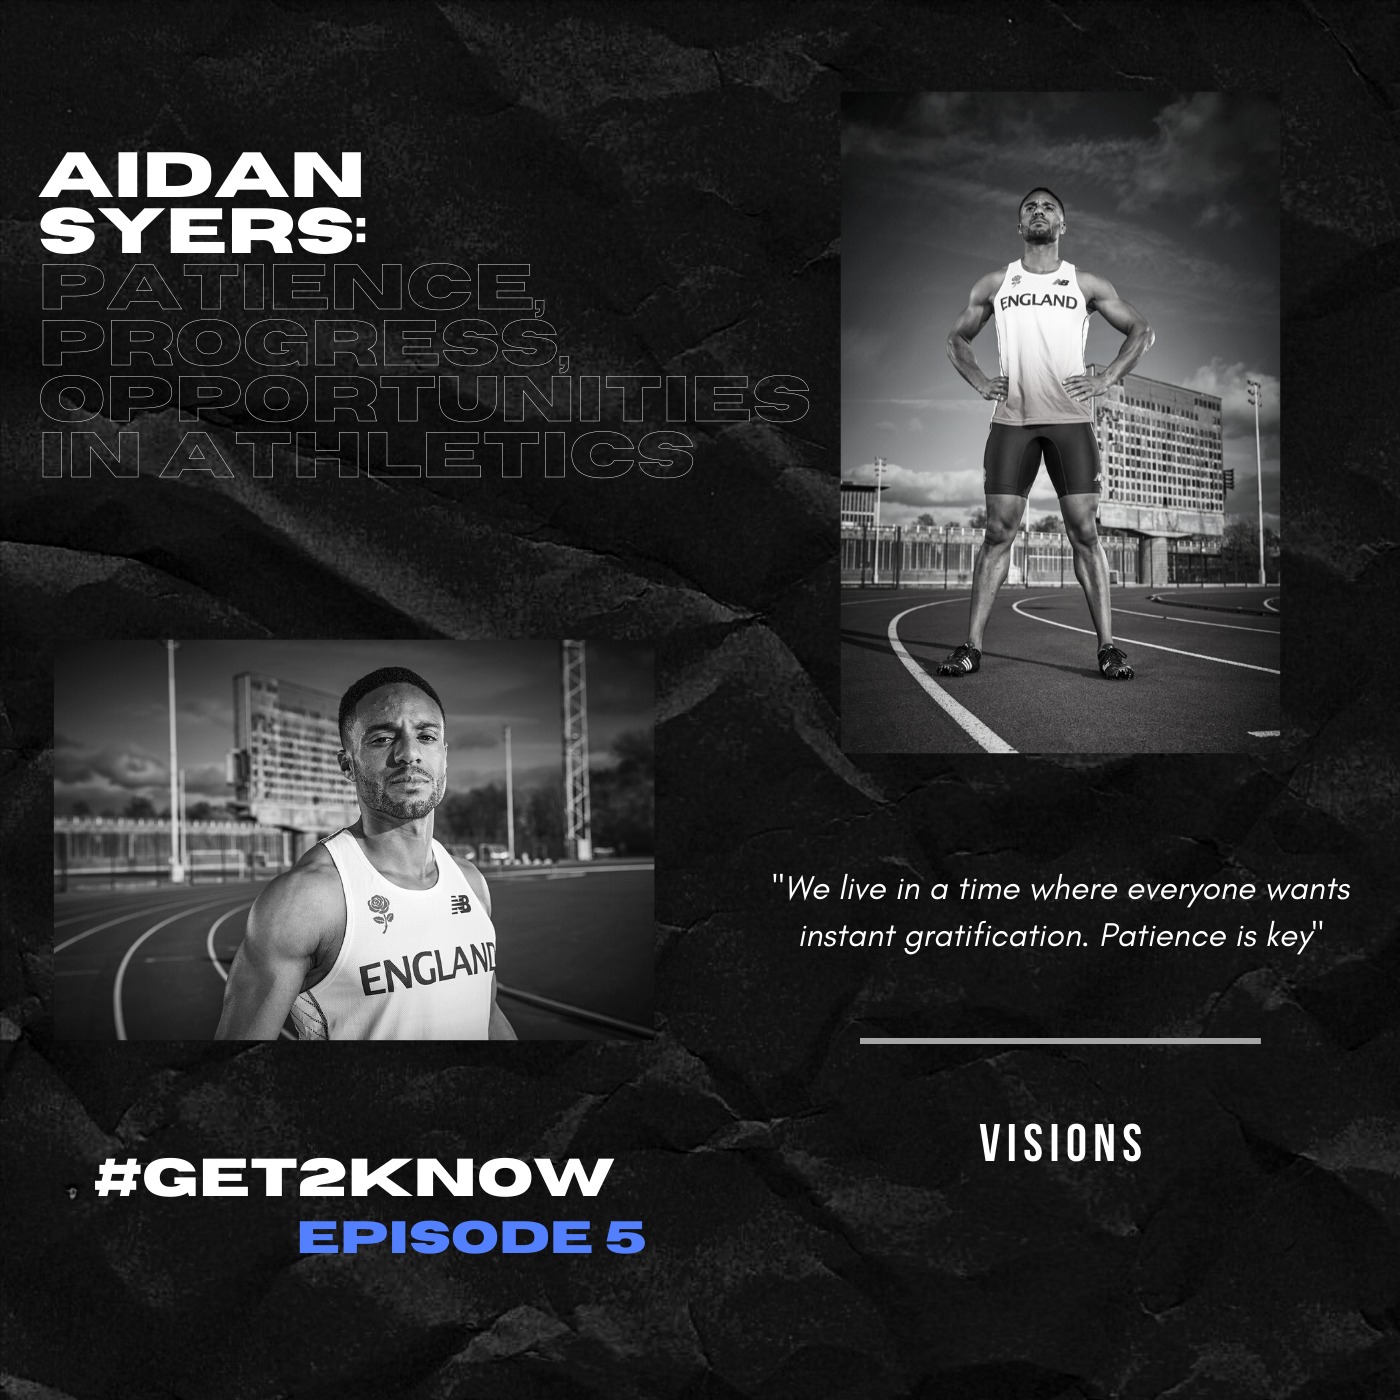 Aidan Syers: Patience, Progress & Opportunities in Athletics - #Get2Know Ep 5